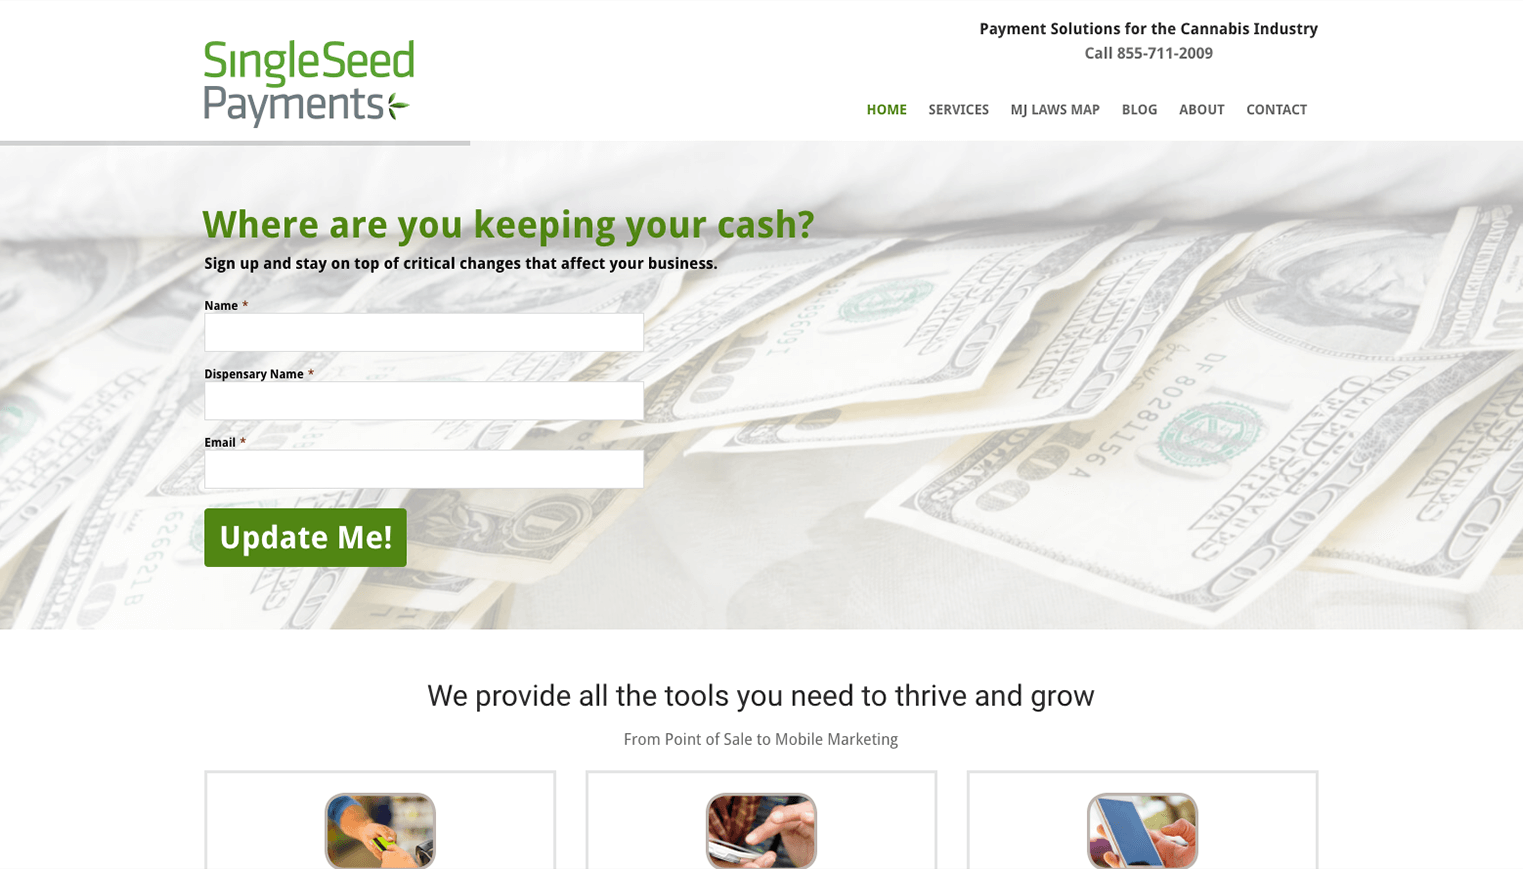 SingleSeed Payments